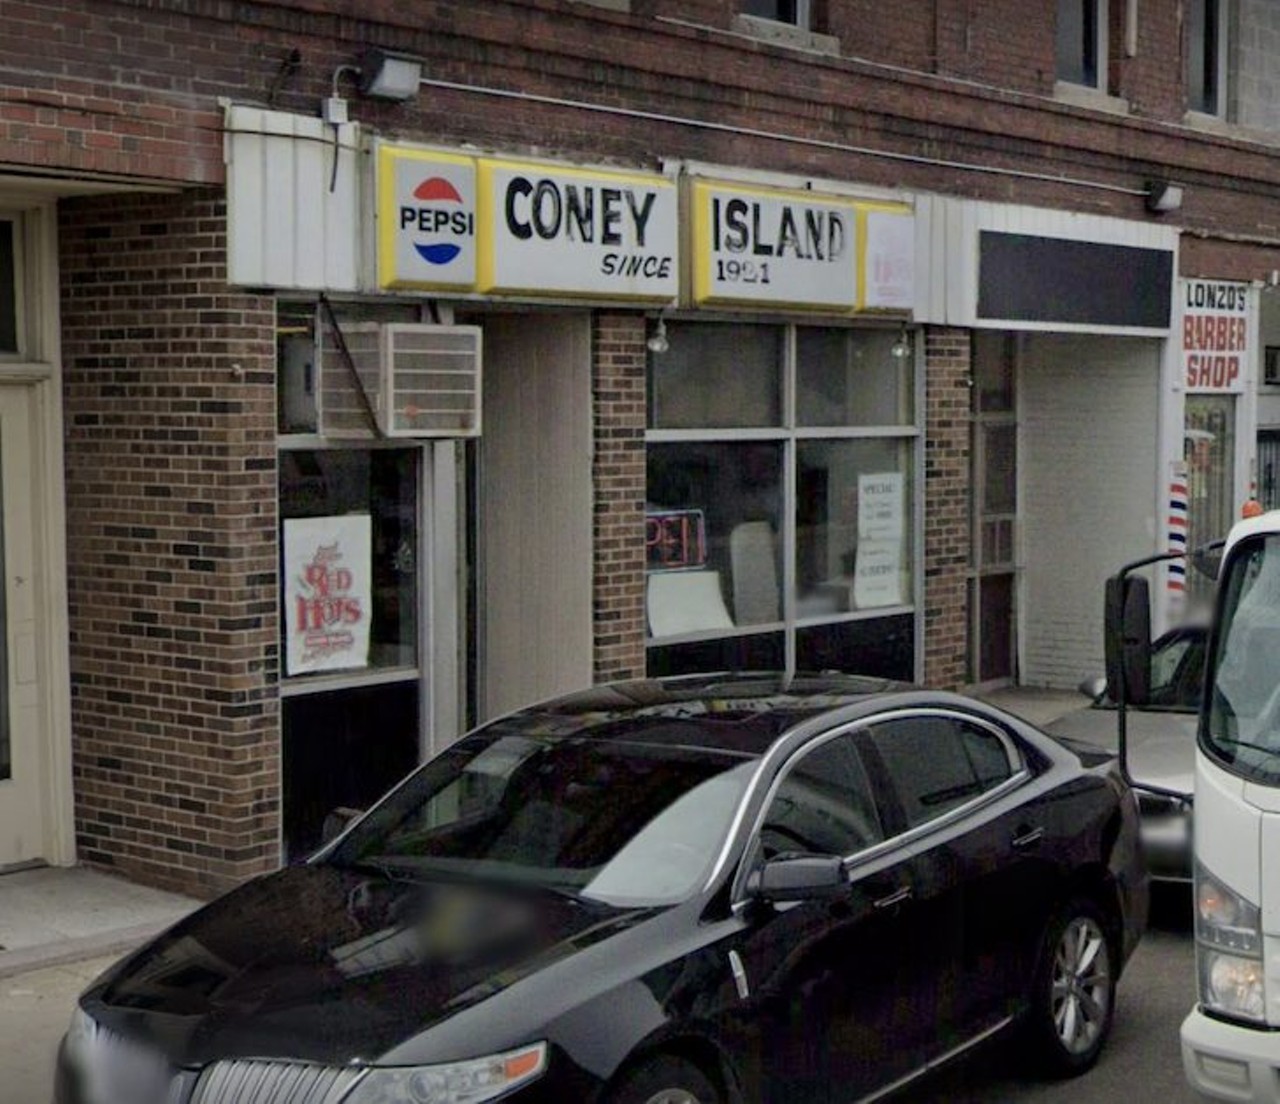 Red Hots Coney Island
12 Victor St., Highland Park
After 100 years in Highland Park, Red Hots Coney Island closed for good back in June. The restaurant&#146;s owners Rich and Carol Harlan decided to celebrate the restaurant&#146;s centennial by retiring.
Photo via Google Maps